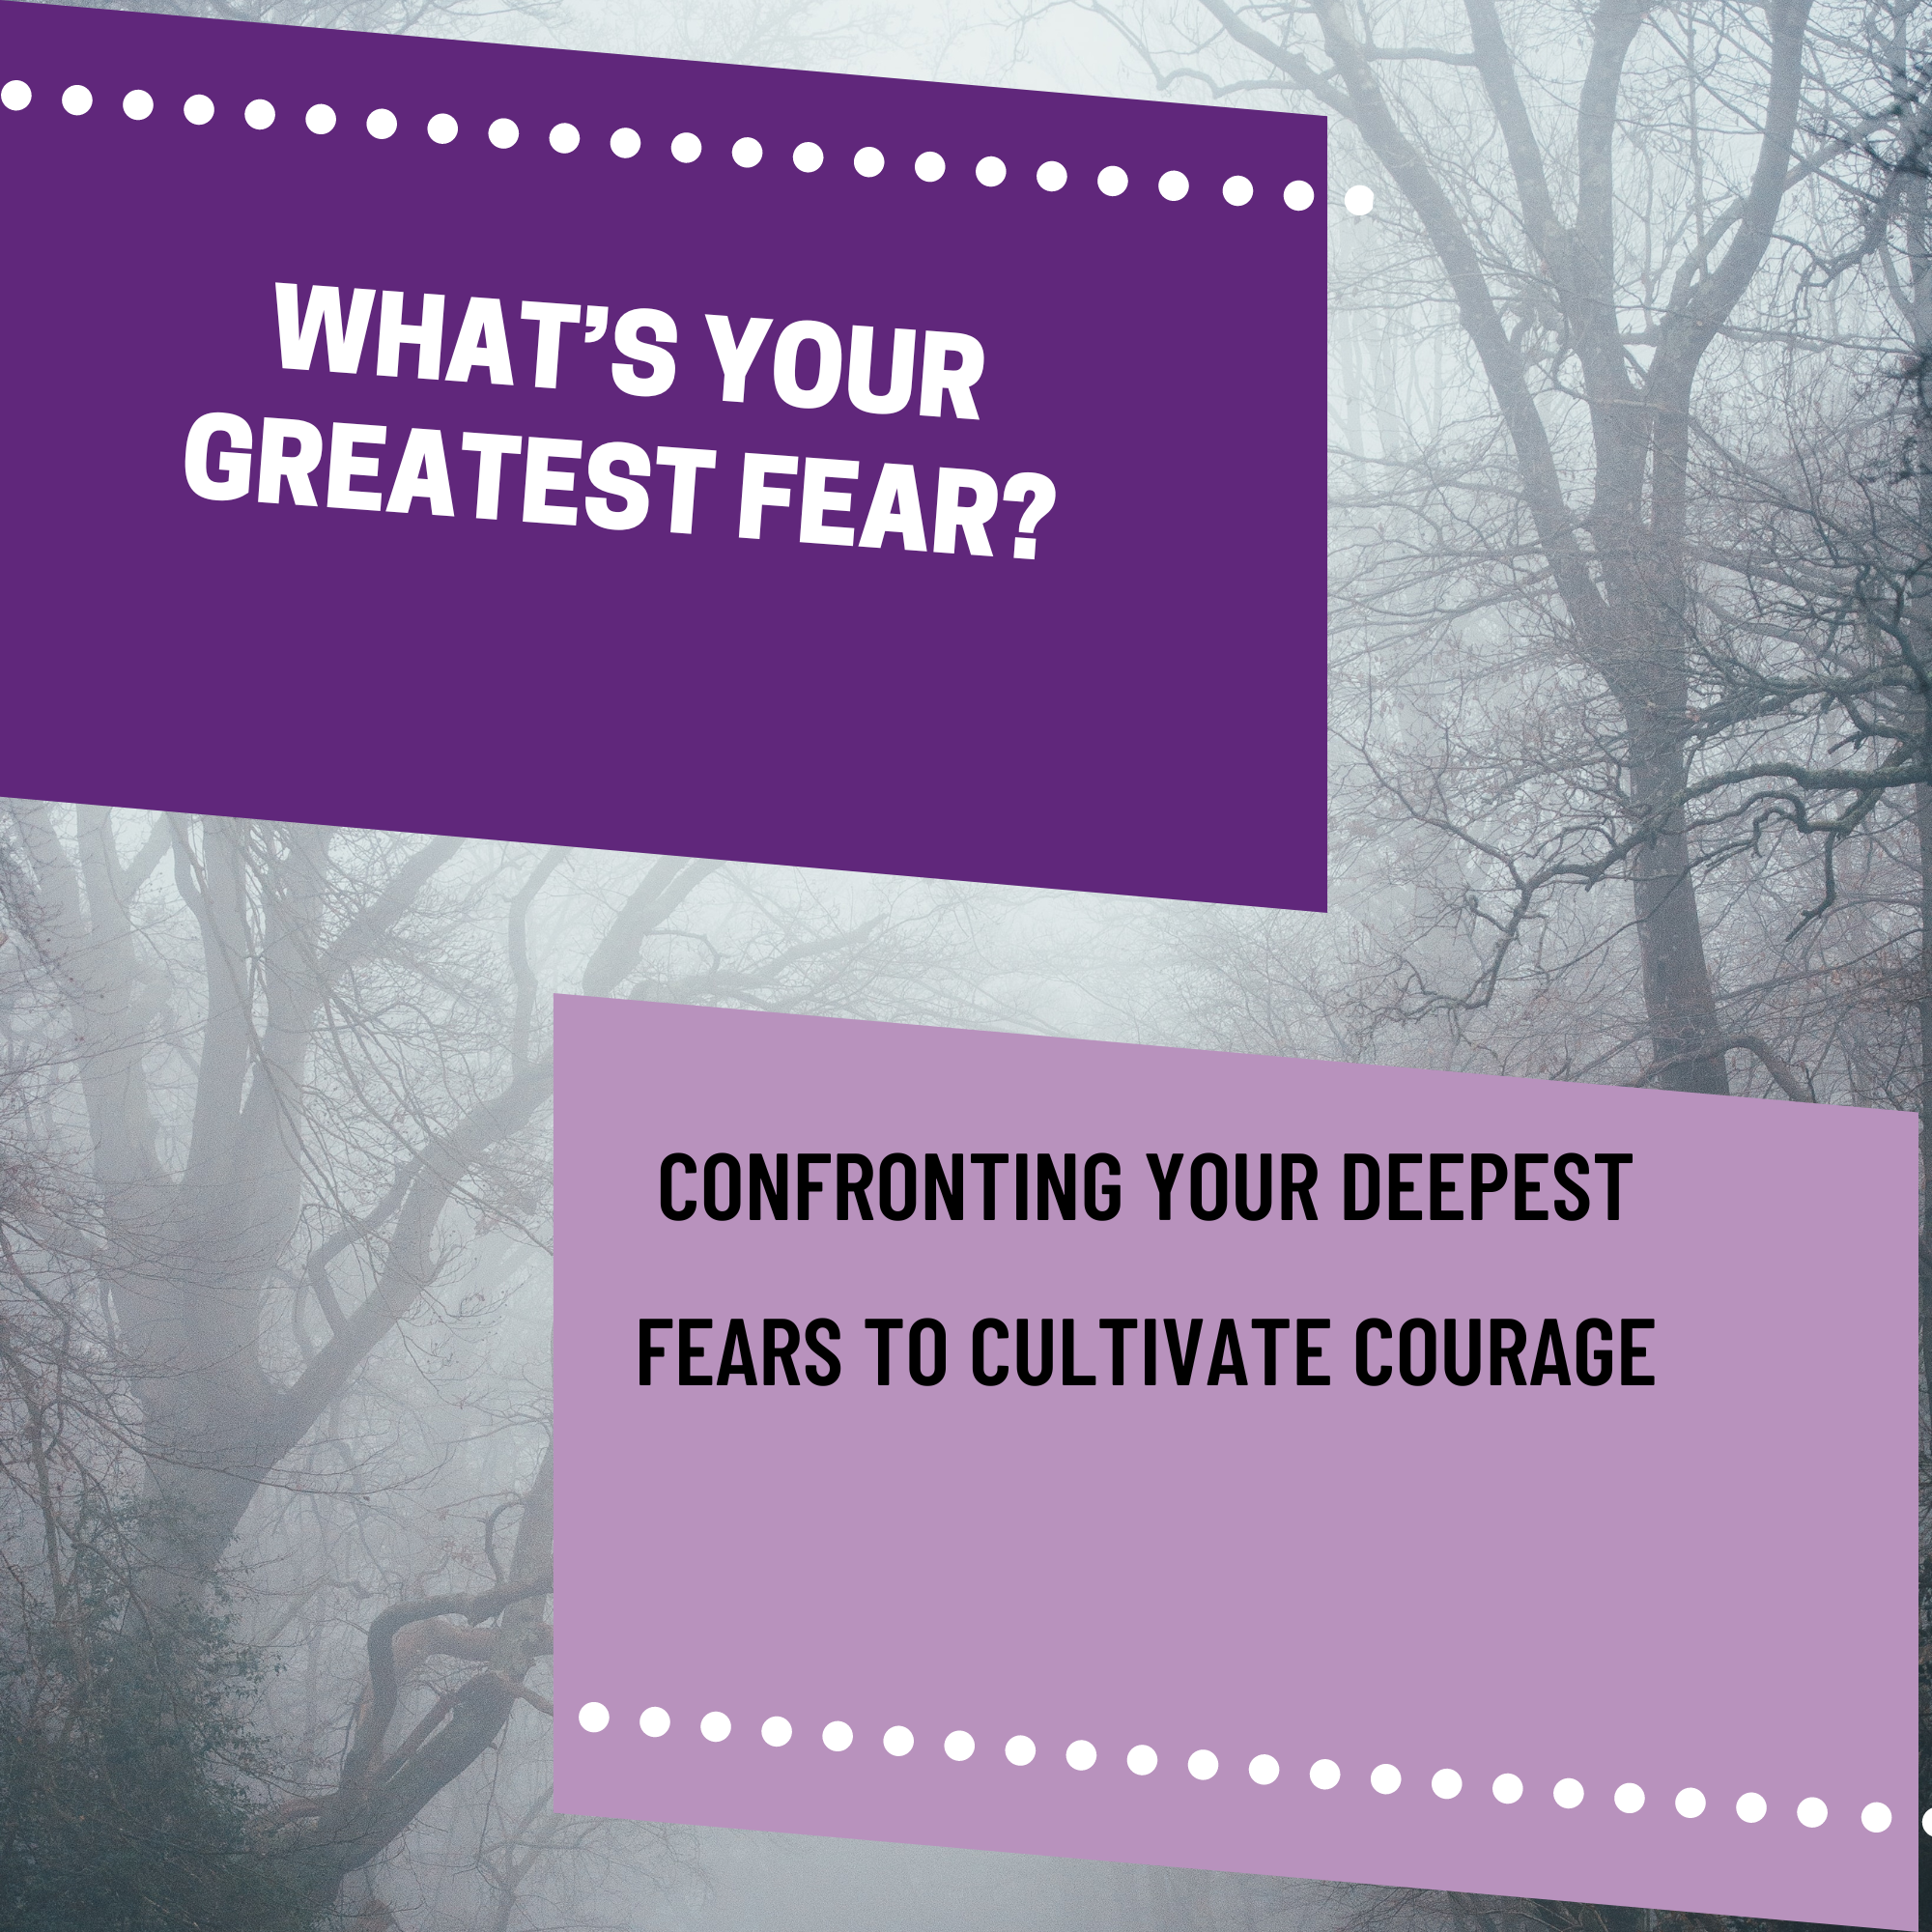 Confronting Your Deepest Fears to Cultivate Courage